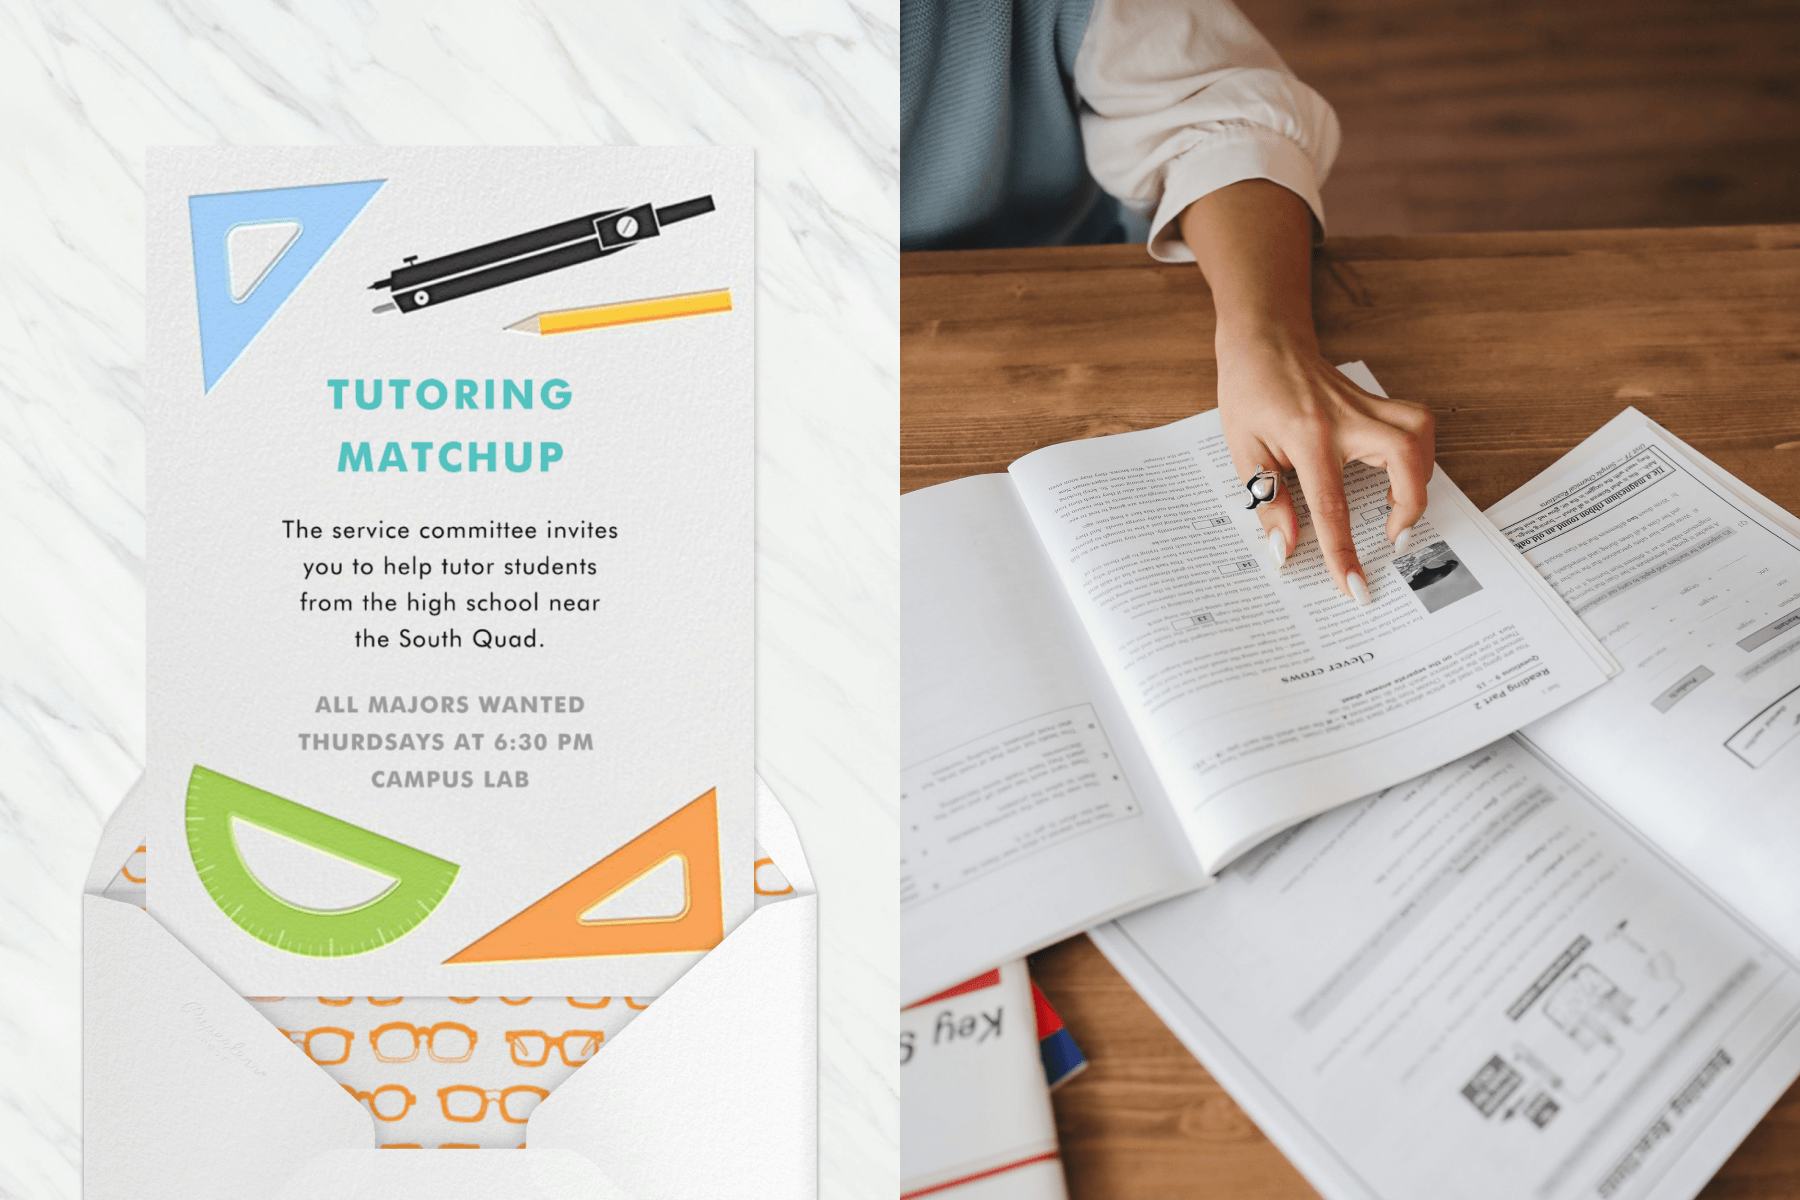 Left: An invitation with simple, colorful illustrations of geometry tools like various rulers, a compass, and pencil. Right: A person’s hand holds down student workbooks on a wooden table.